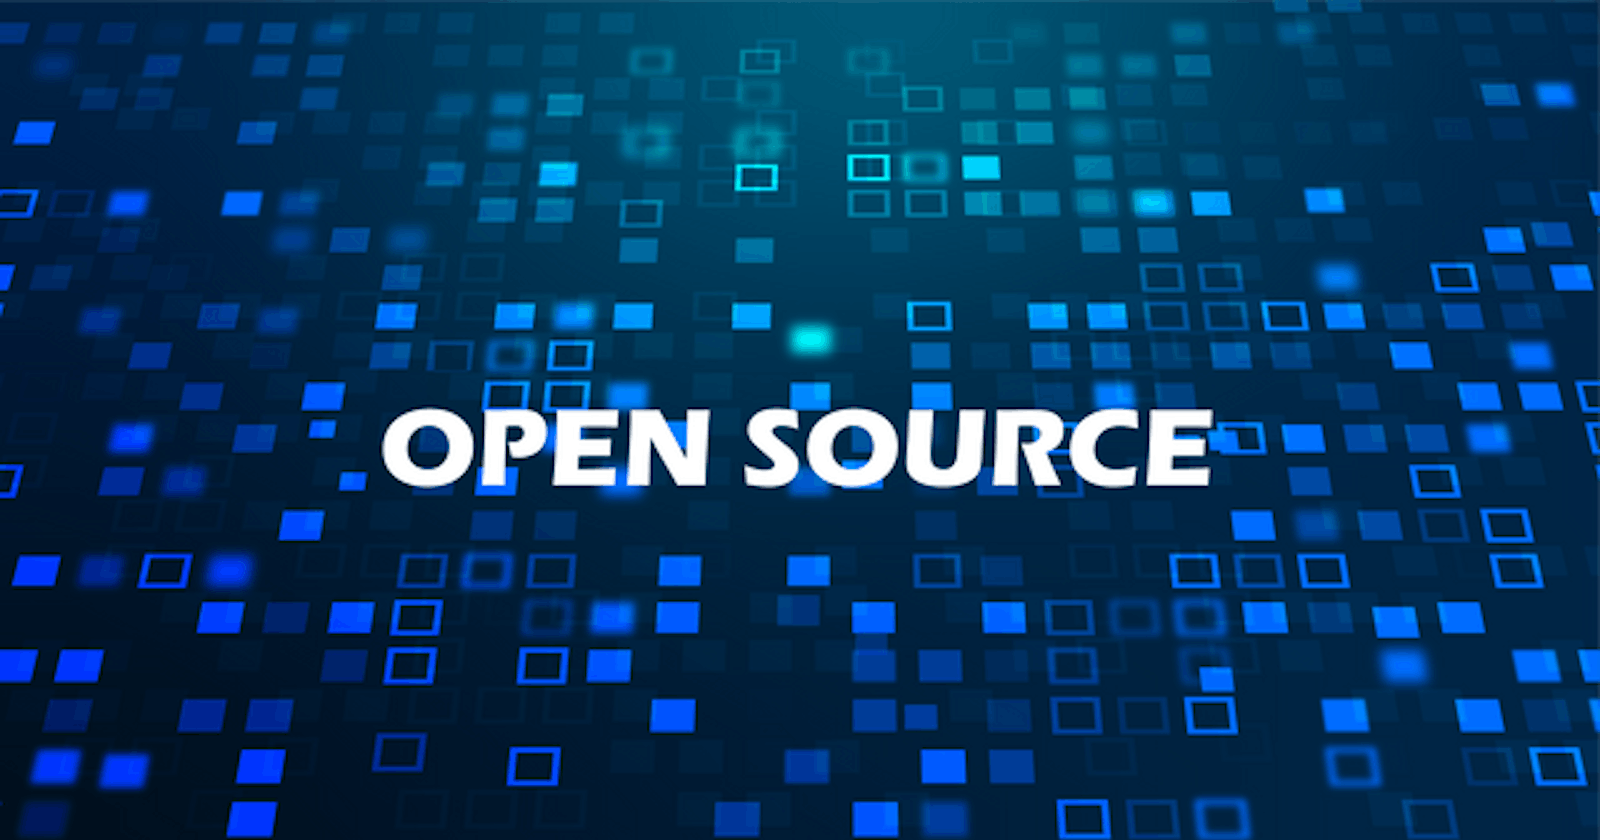 A Gist about the World of Open Source